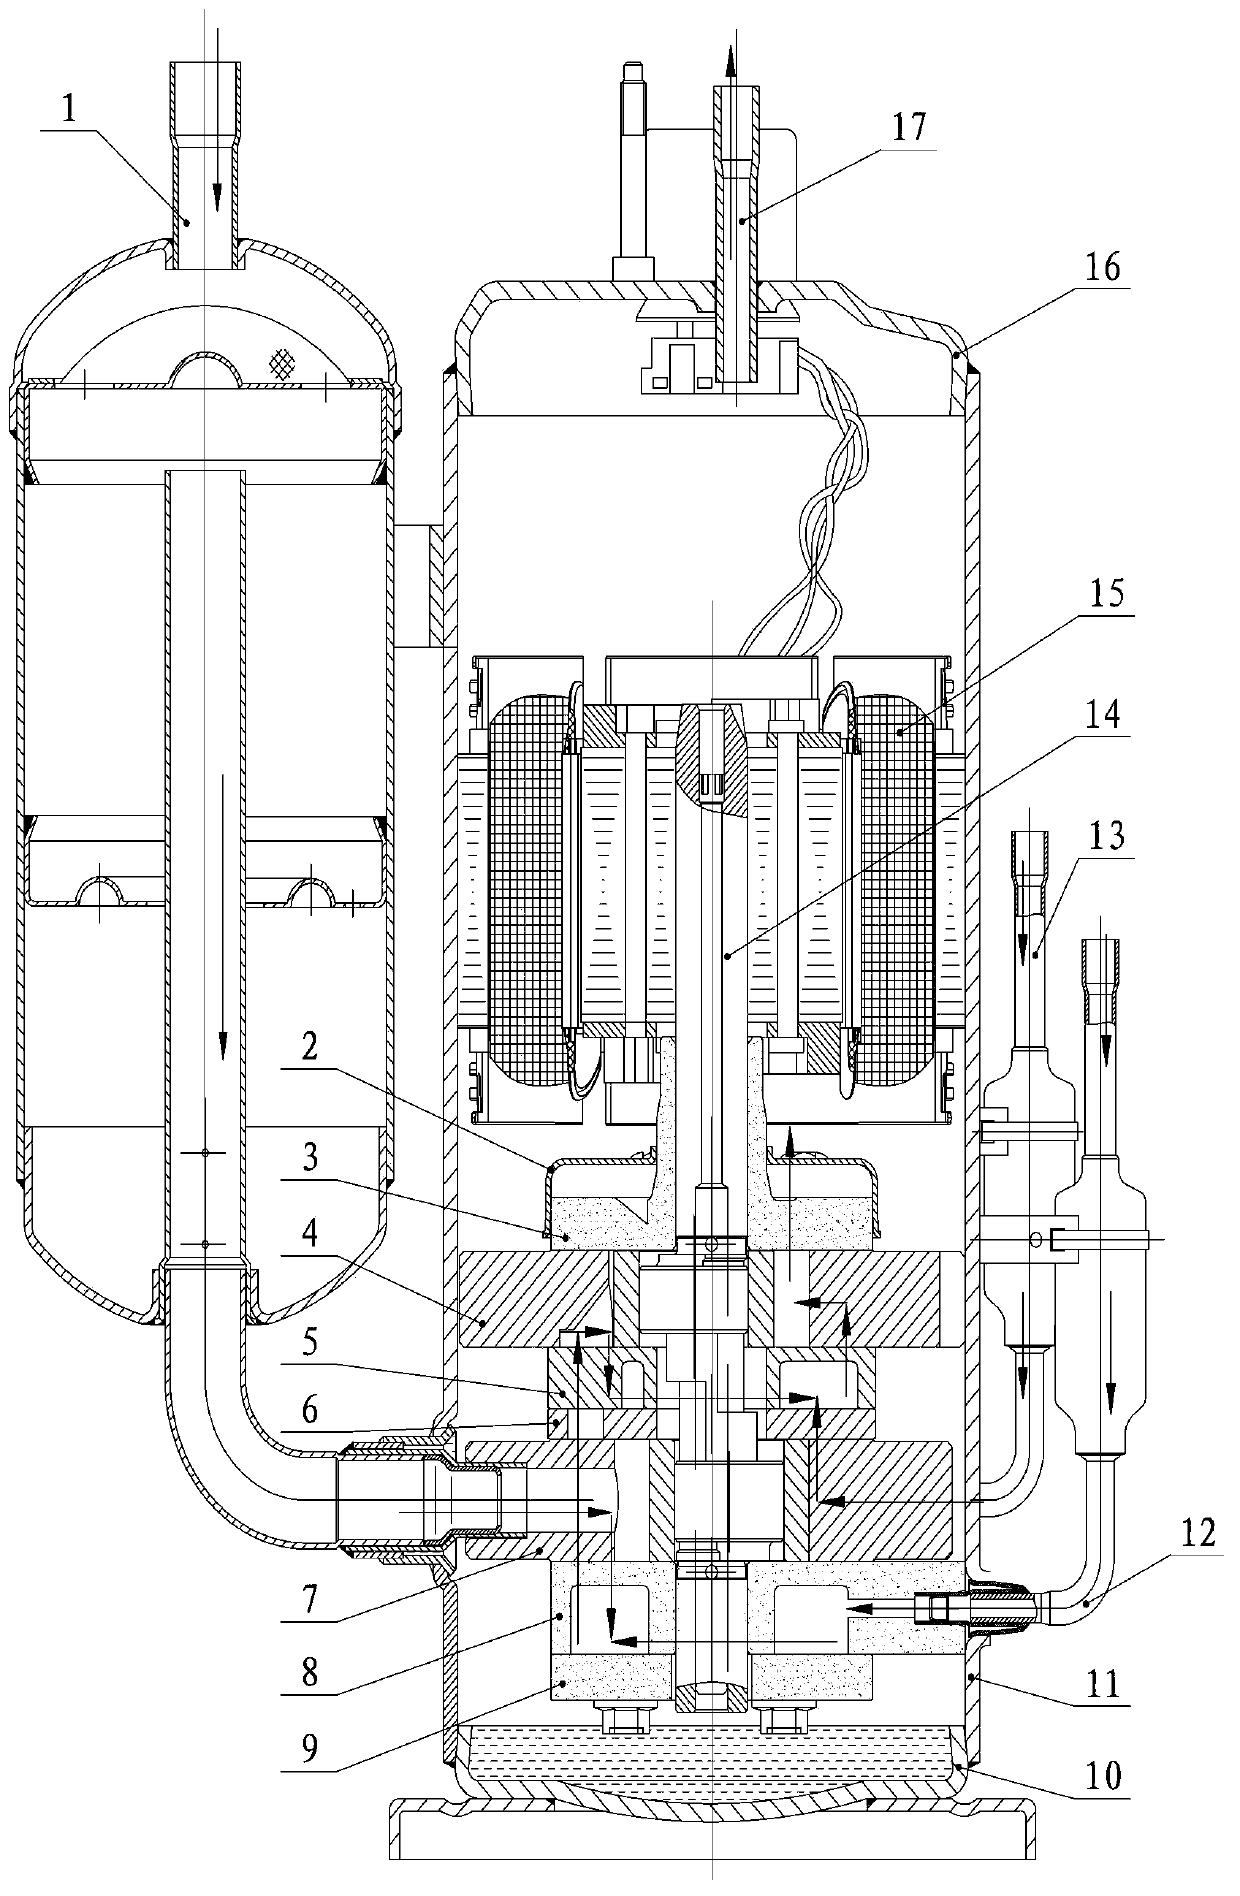 Compressor and air conditioner with same